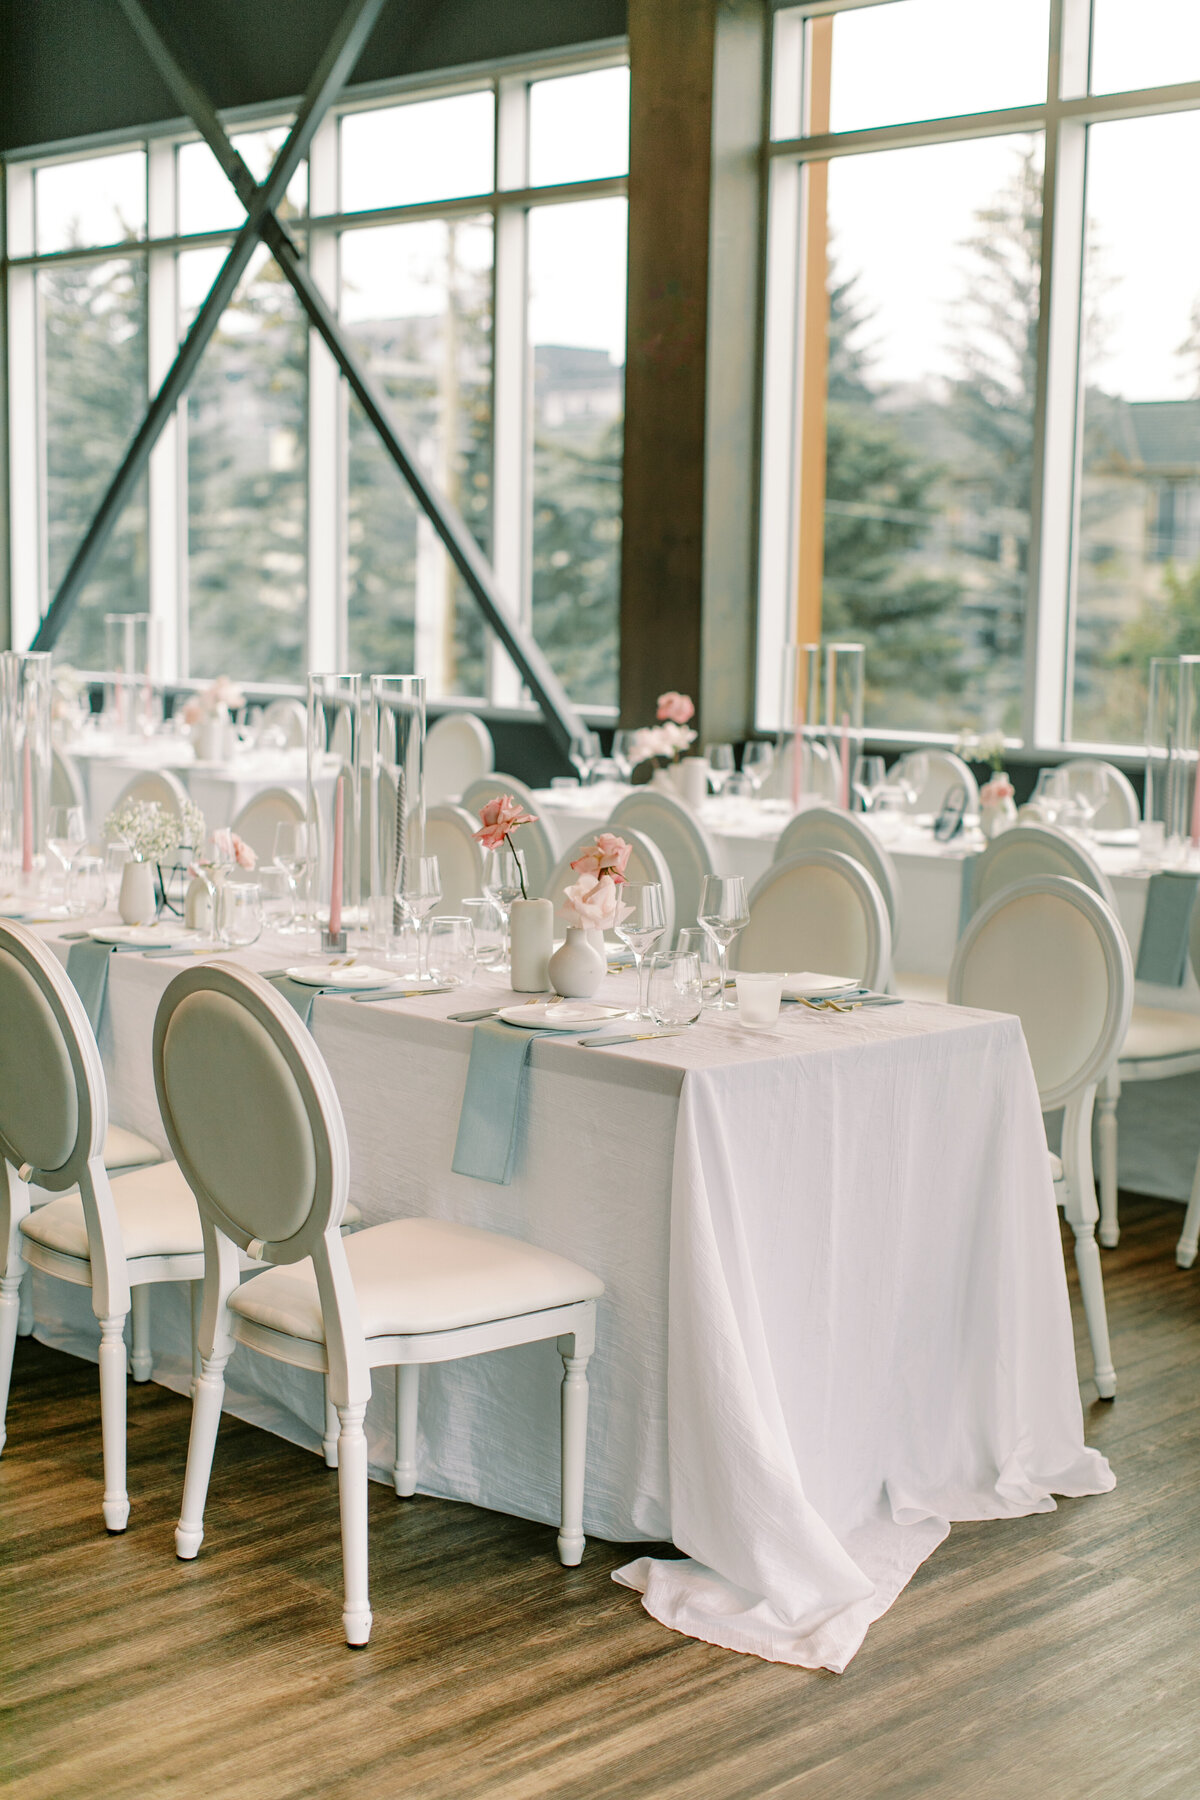 Modern Chic Wedding at The Sensory in Canmore Alberta, designed and planned by Rebekah Brontë, with a colour palette of fresh white, smoke grey, blush pink, and subtle seafoam.